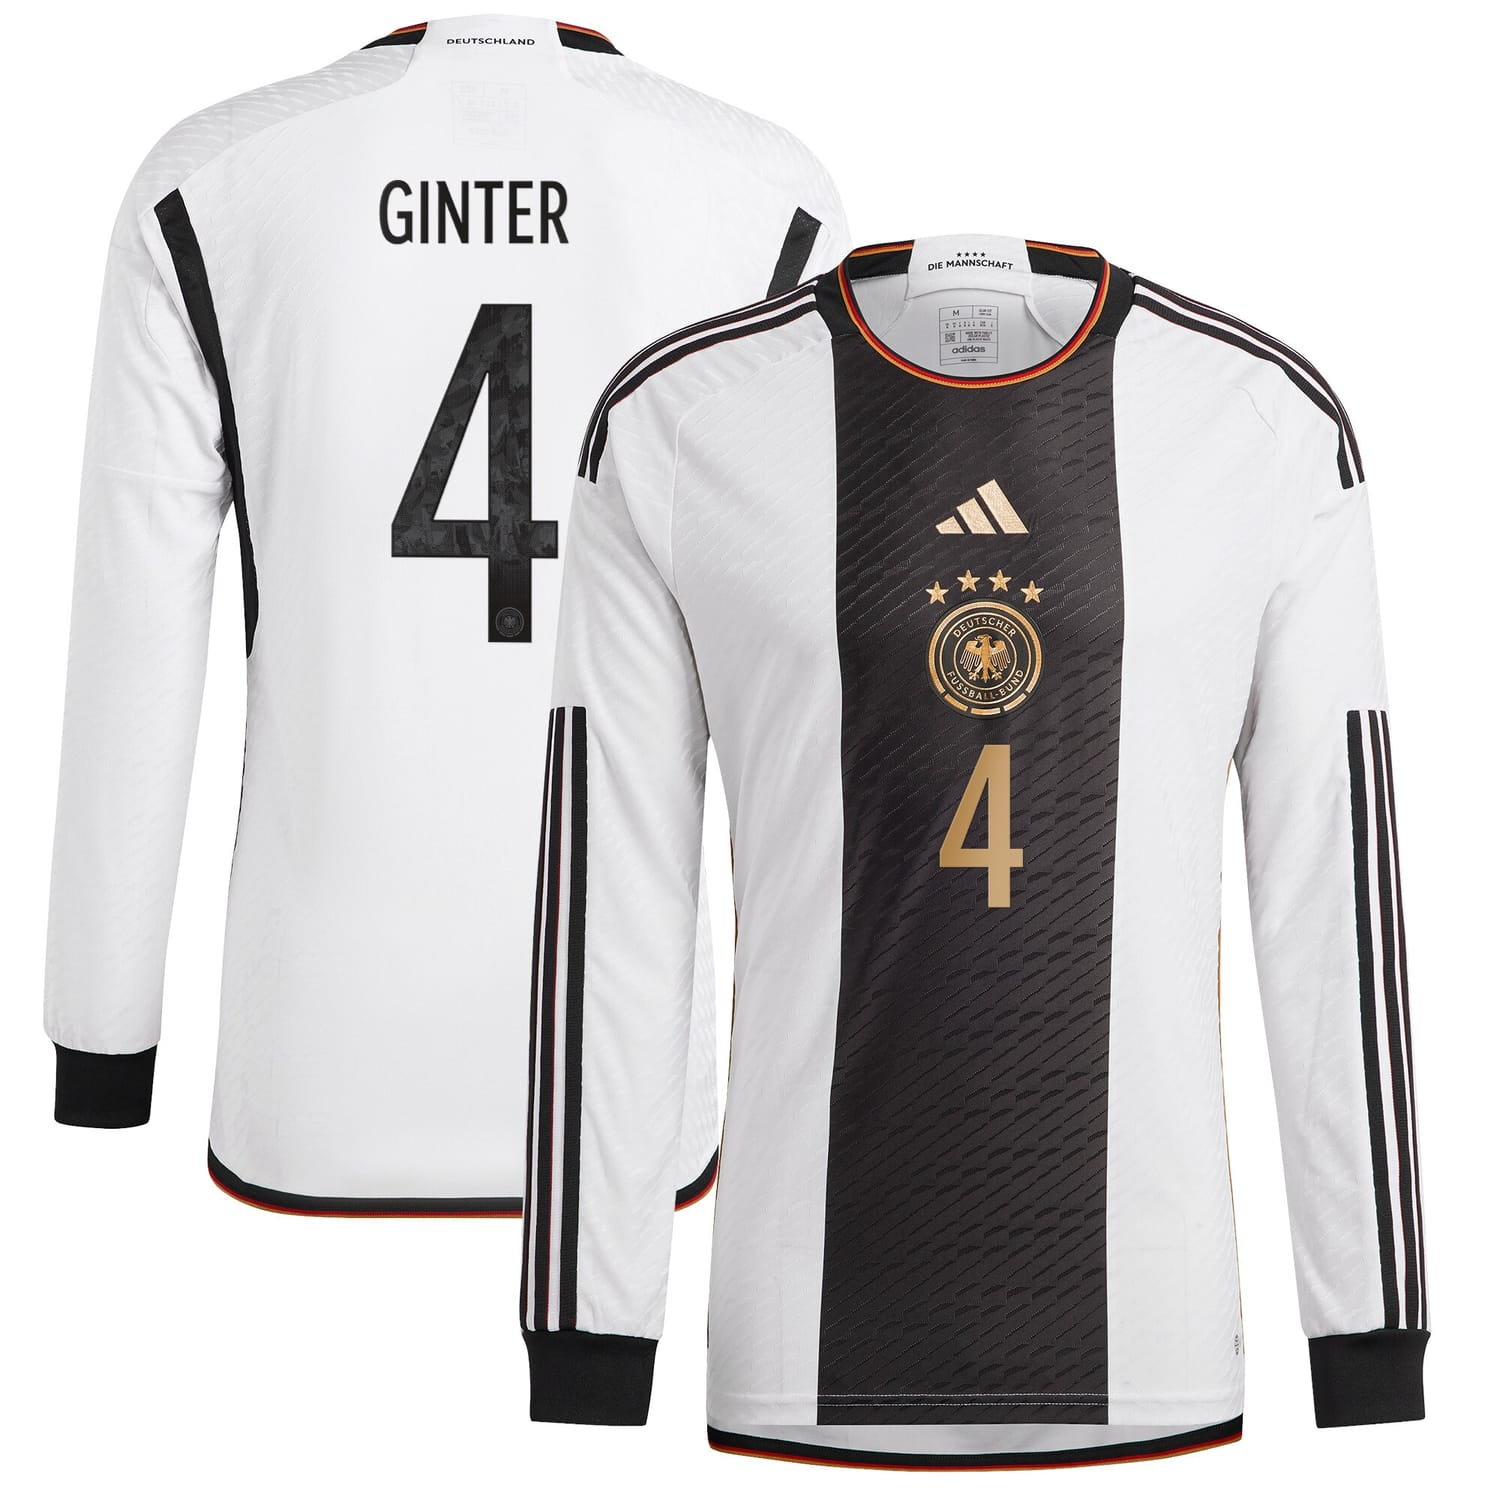 Germany National Team Home Authentic Jersey Shirt Long Sleeve player Matthias Ginter 4 printing for Men